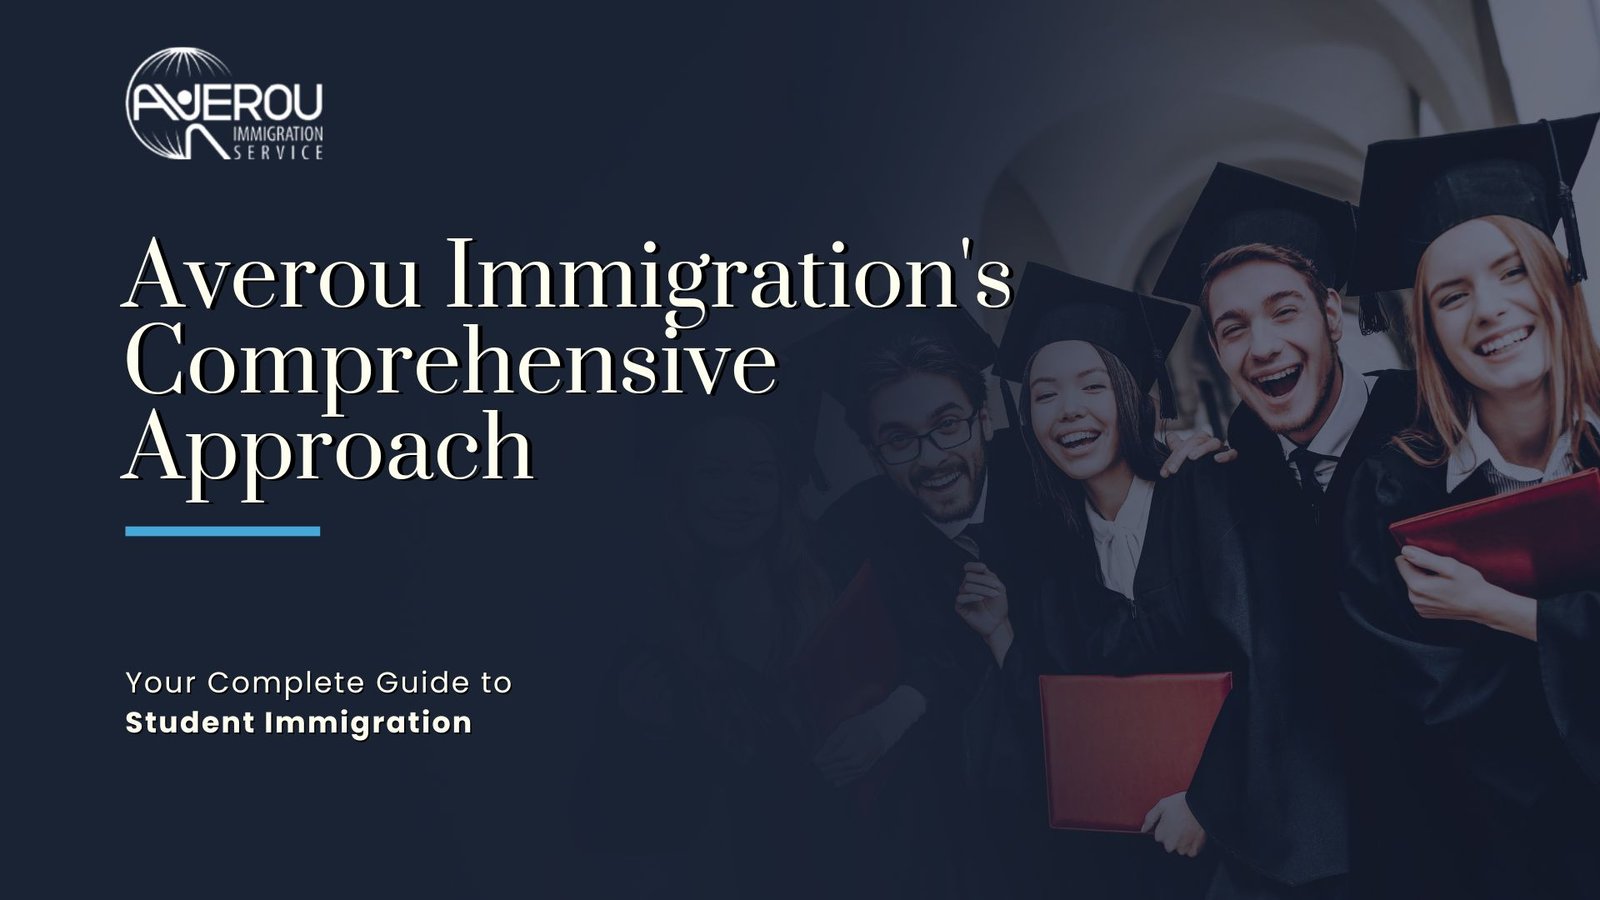 Averou Immigration’s Comprehensive Approach to Student Immigration